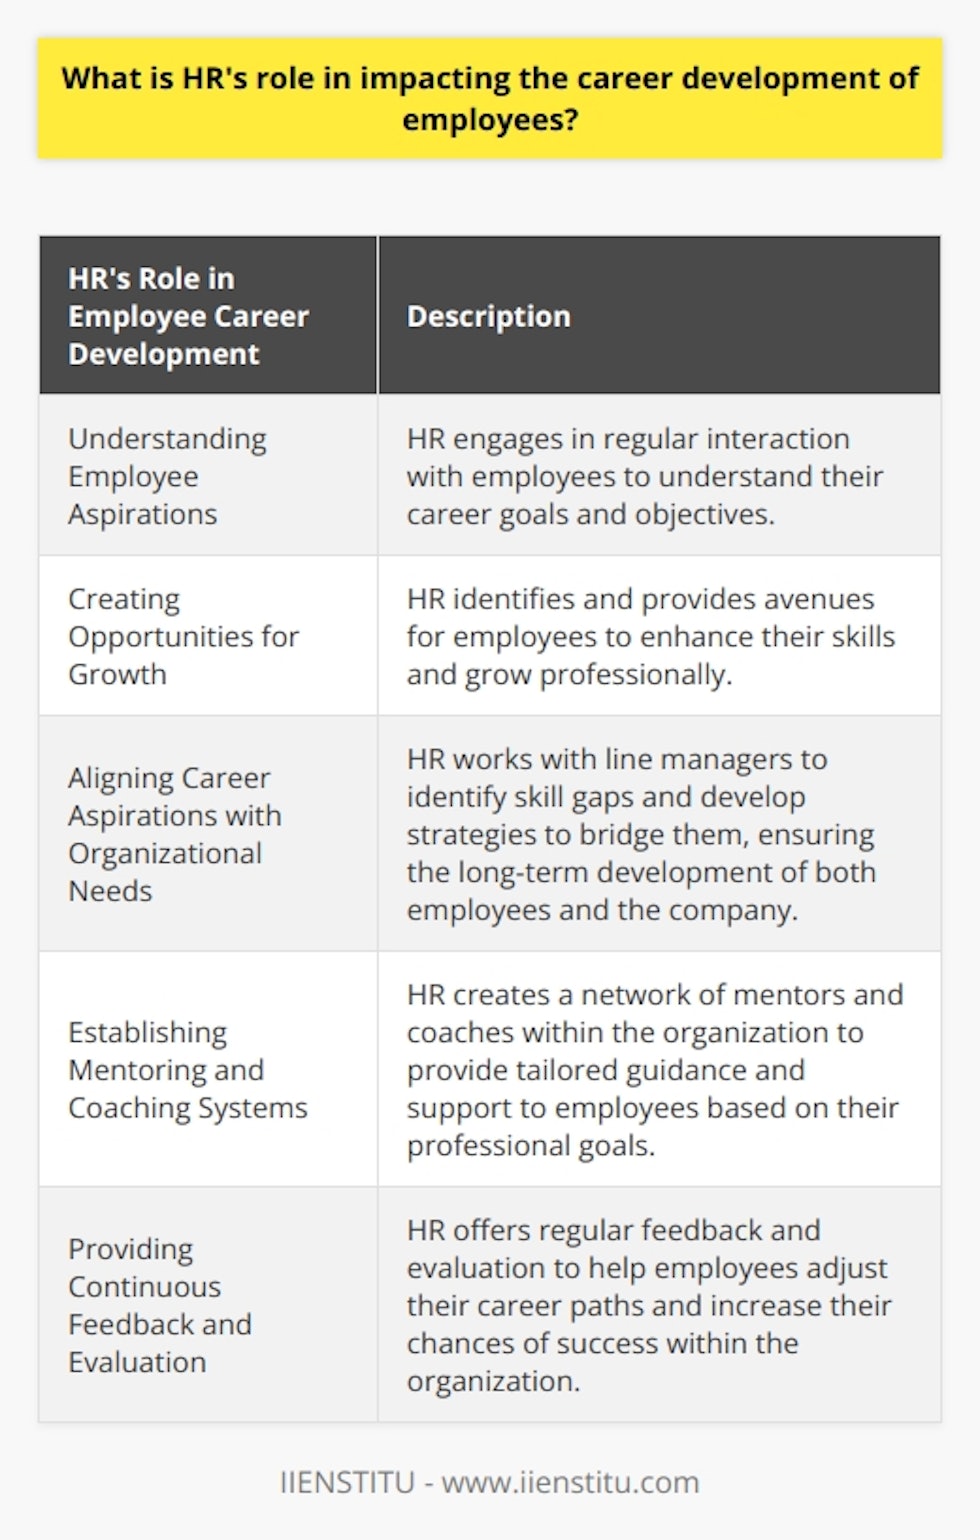 HR plays a vital role in impacting the career development of employees. One of the essential functions is understanding the aspirations and objectives of employees. HR professionals engage in regular interaction with team members, conduct career planning sessions, and develop individualized plans to ensure overall satisfaction and commitment to the organization.Creating opportunities for growth is another crucial aspect of HR's role in employee career development. HR identifies and provides various avenues for employees to enhance their skills and grow professionally. This can be achieved through internal programs, cross-functional work experiences within the organization, or partnerships with external institutions. HR also actively encourages employee participation and tracks their progress to support their career goals.Aligning employee career aspirations with the organization's strategic needs is also a significant responsibility of HR. Working in collaboration with line managers, HR helps identify skill gaps and develops strategies to bridge those gaps. By striking a balance between employee goals and organizational priorities, HR ensures the long-term development of both the workforce and the company.To foster a supportive work environment, HR establishes mentoring and coaching systems. This involves creating a network of mentors and coaches within the organization who provide tailored guidance and support to employees based on their professional objectives. This not only enhances employee experience but also improves retention rates and strengthens the overall skill set of the workforce.Providing continuous feedback and evaluation is another critical role of HR in employee career development. This feedback can be in the form of formal evaluations or informal discussions. It is essential for HR professionals to stay updated on industry trends and market conditions to provide sound career advice. By offering regular feedback, employees can adjust their career paths based on constructive input, increasing their chances of success within the organization.In conclusion, HR plays a multifaceted role in impacting the career development of employees. By understanding employee aspirations, creating growth opportunities, aligning career goals with the organization's needs, and facilitating mentoring and coaching, HR drives a robust career development program. This not only boosts employee satisfaction and retention but also contributes to the overall success of the organization.